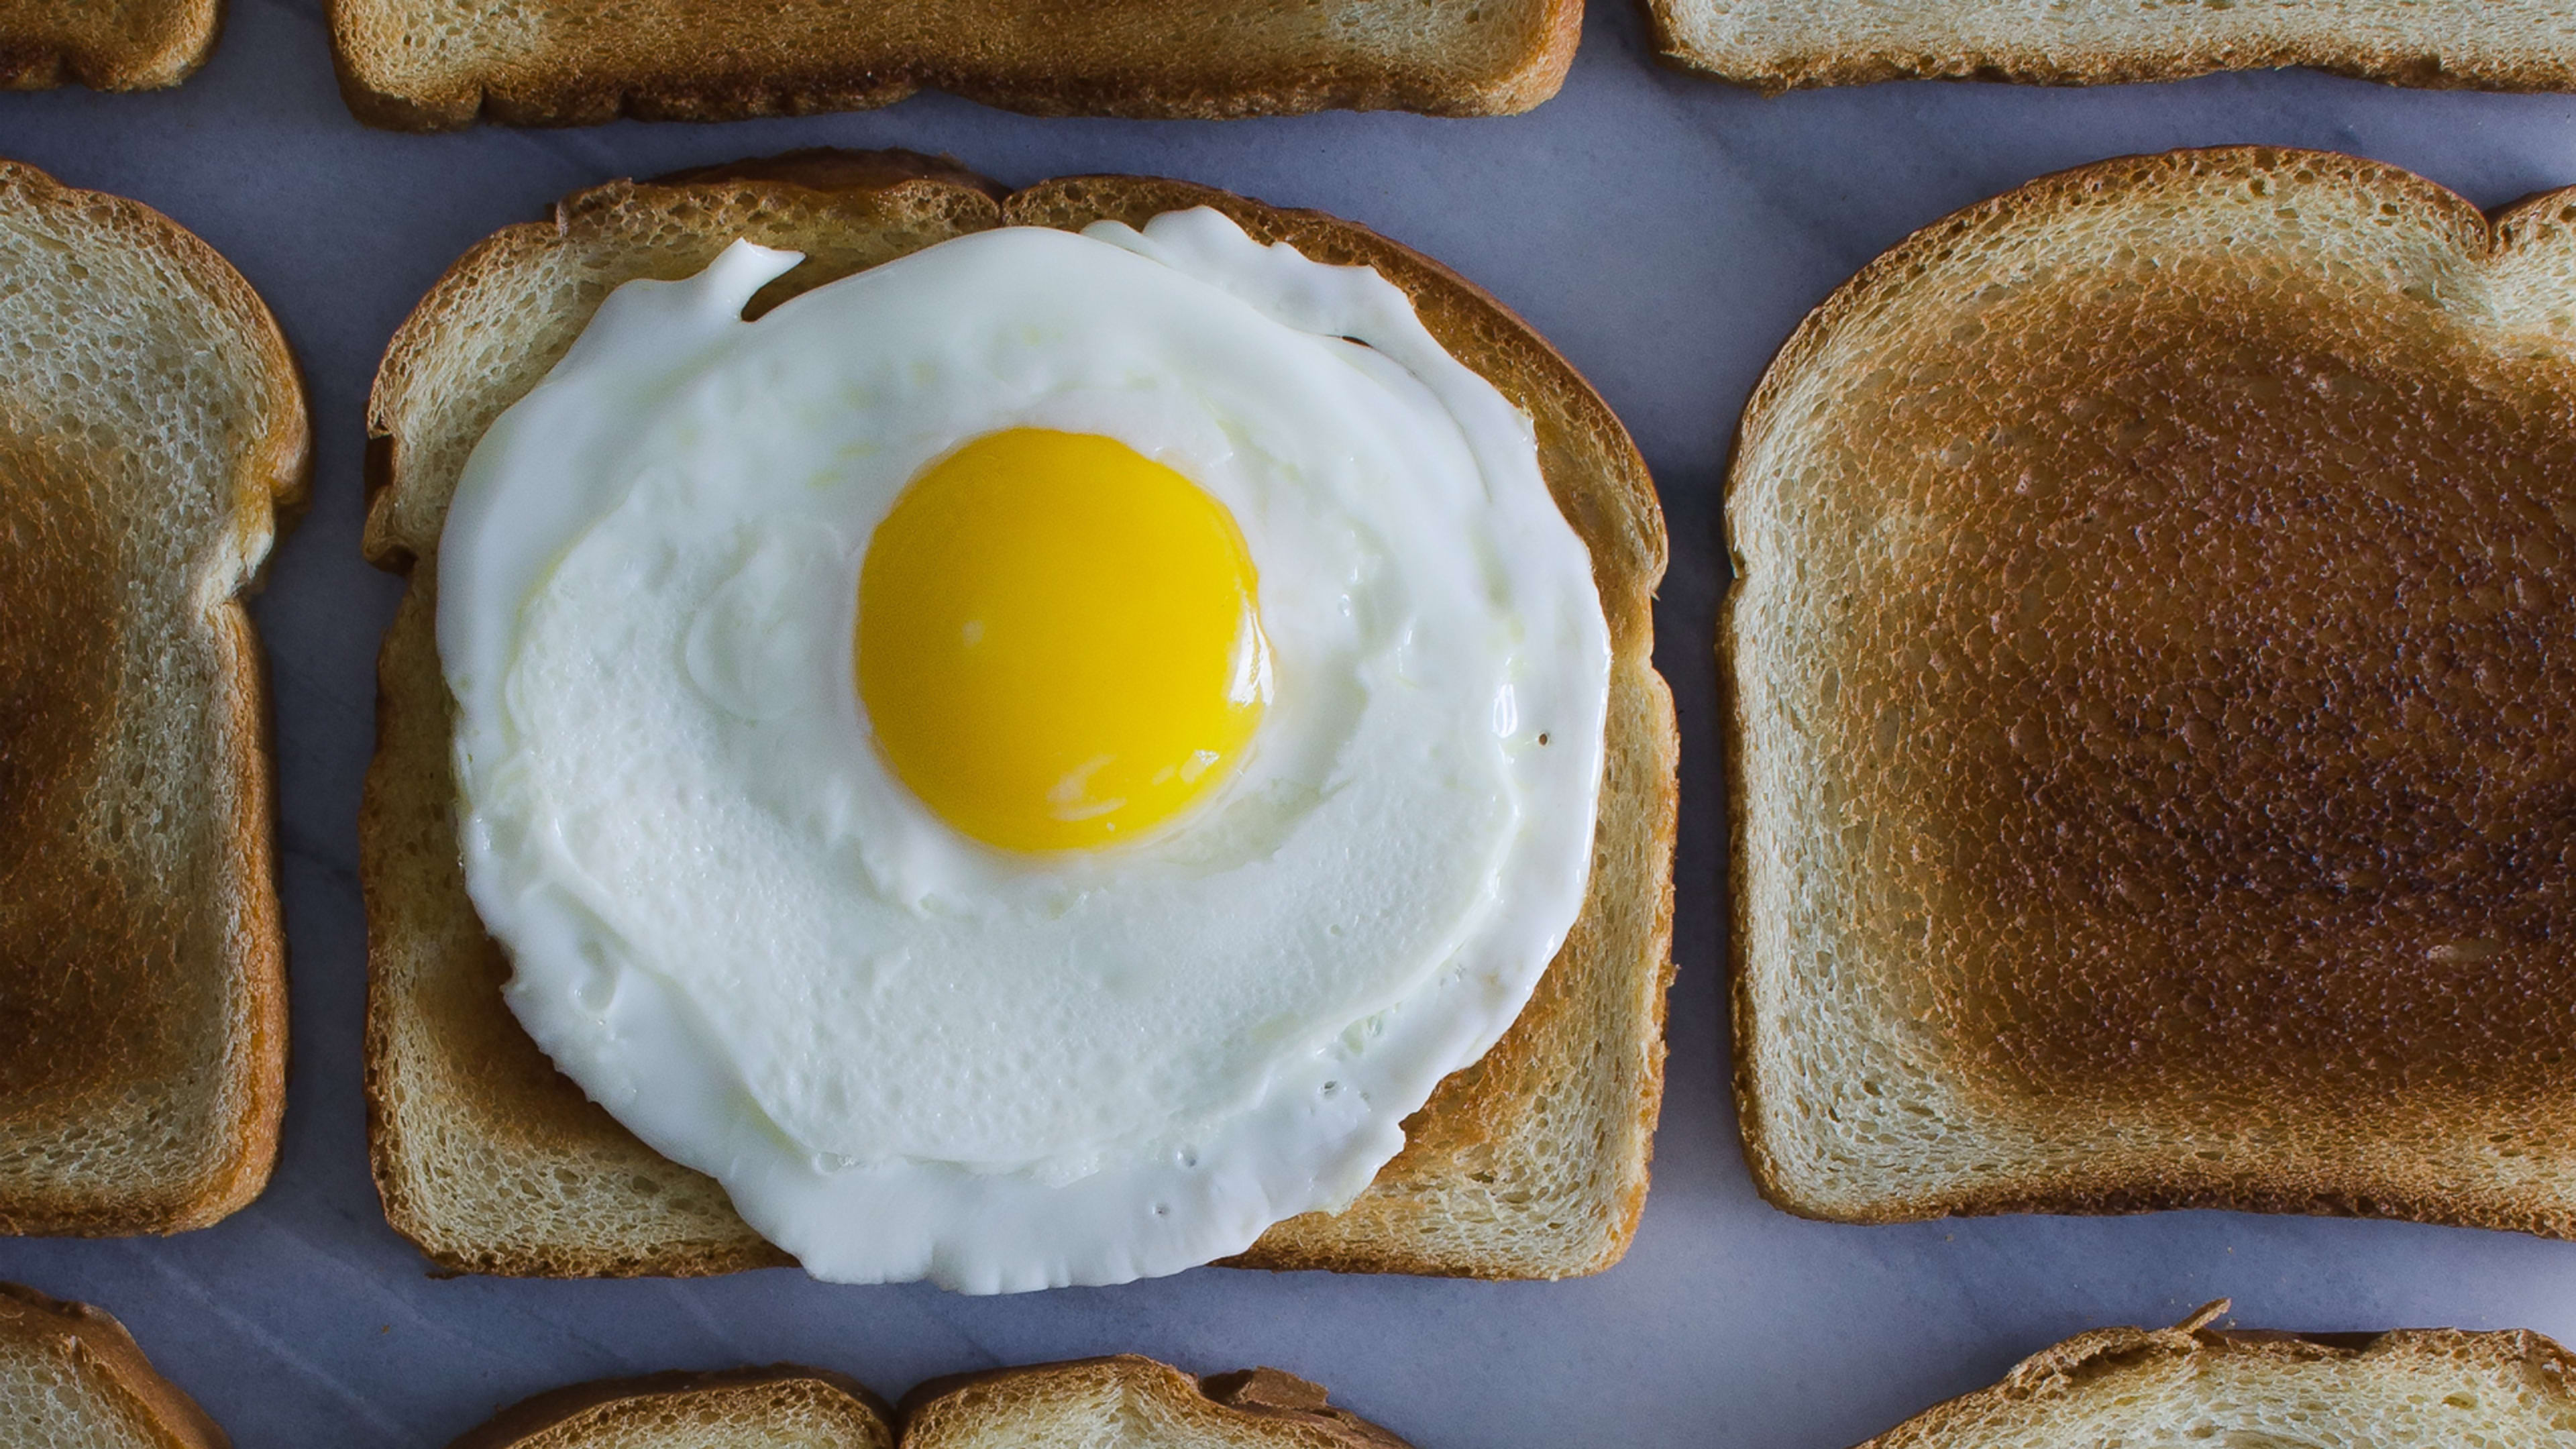 Panera petitions the U.S. to finally define “egg”